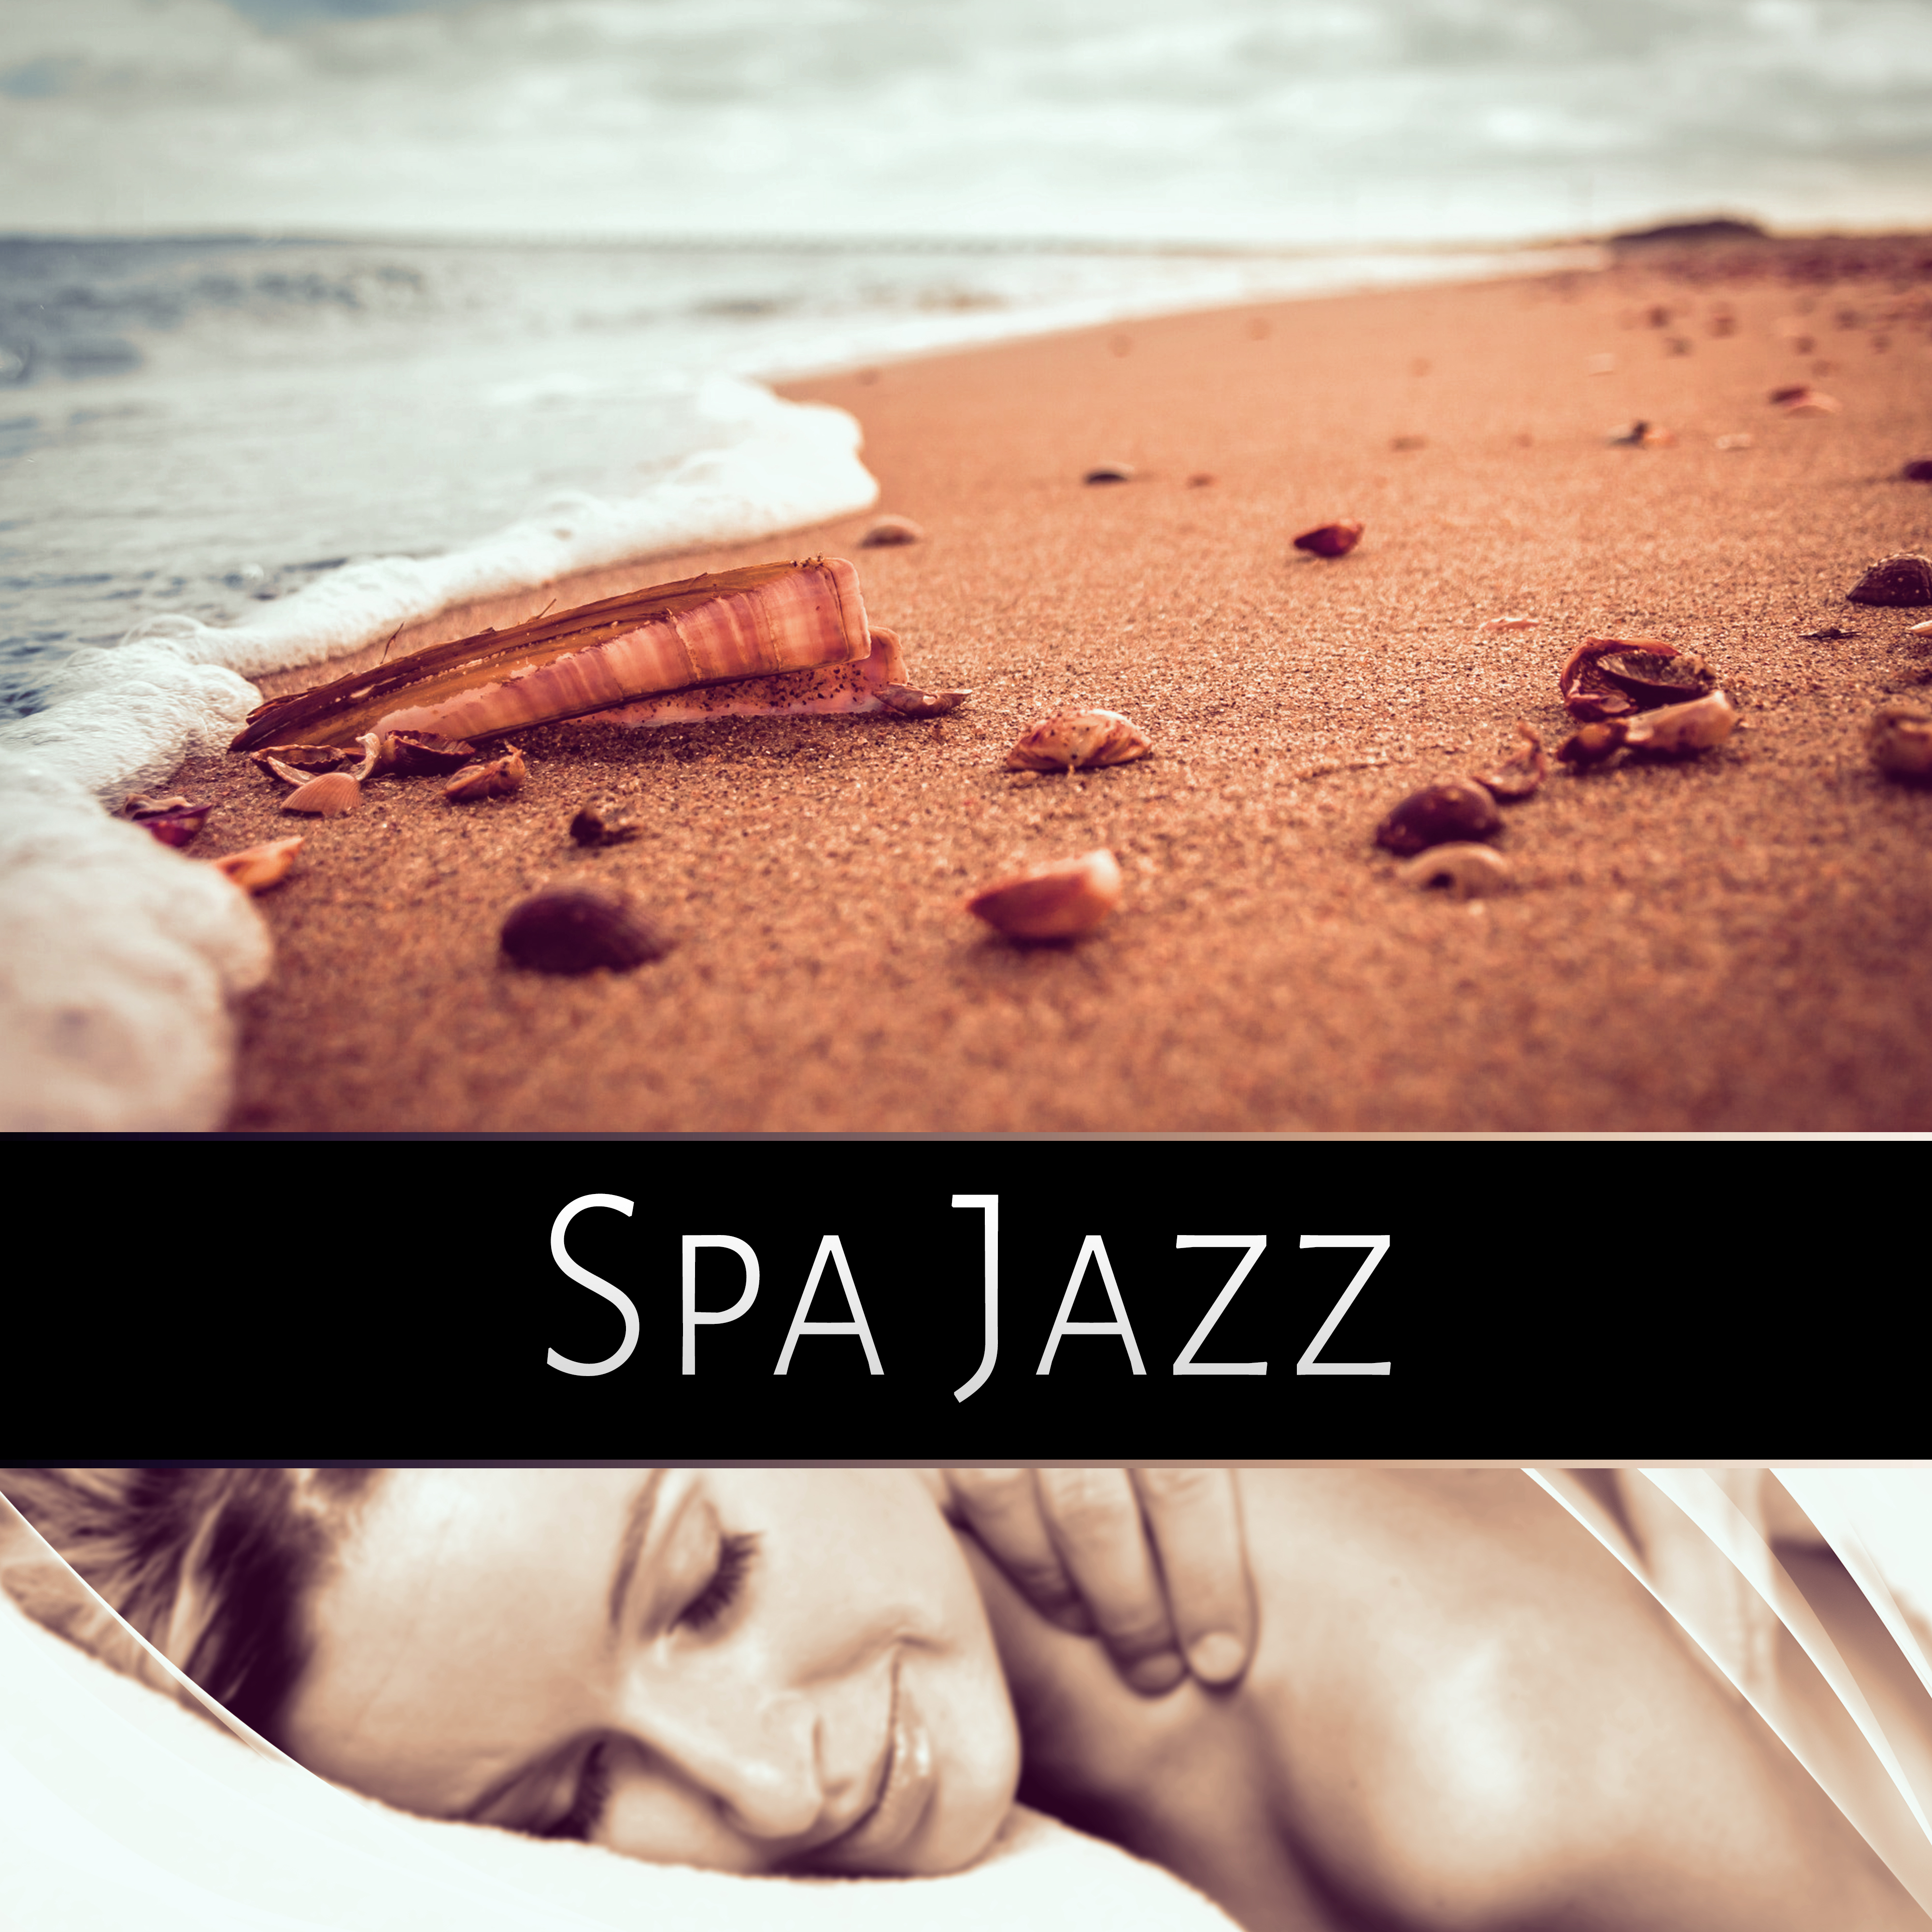 Spa Jazz - Relaxing Piano Jazz Music, Smooth Jazz to Relax, Massage Music, Lounge Music, Restful Sleep, Serenity SPA, Tranquility